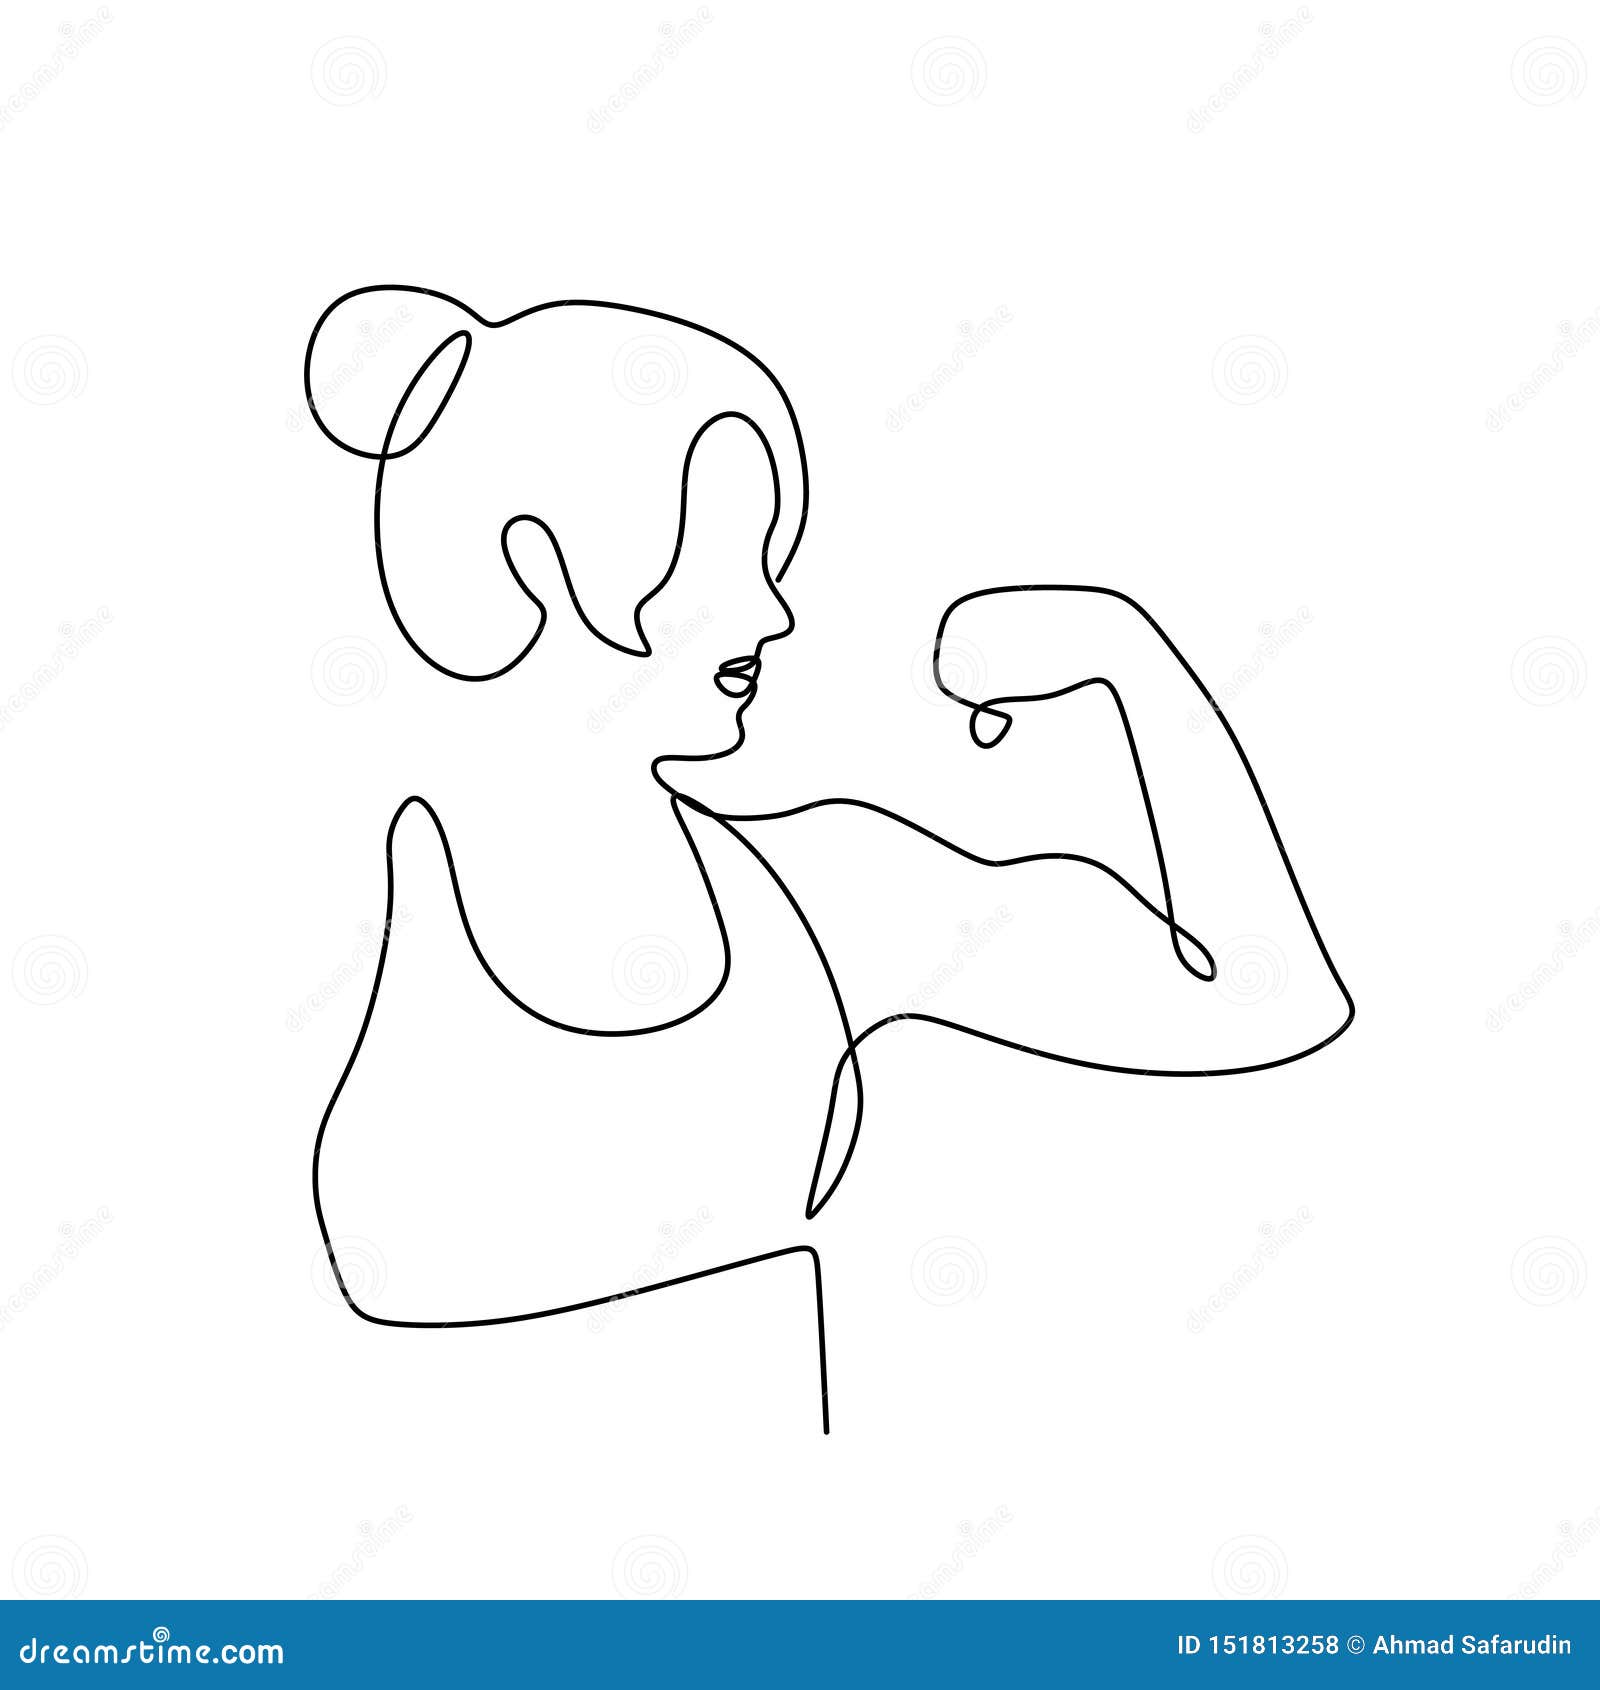 Strong Women Continuous One Line Drawing Minimalist Design on